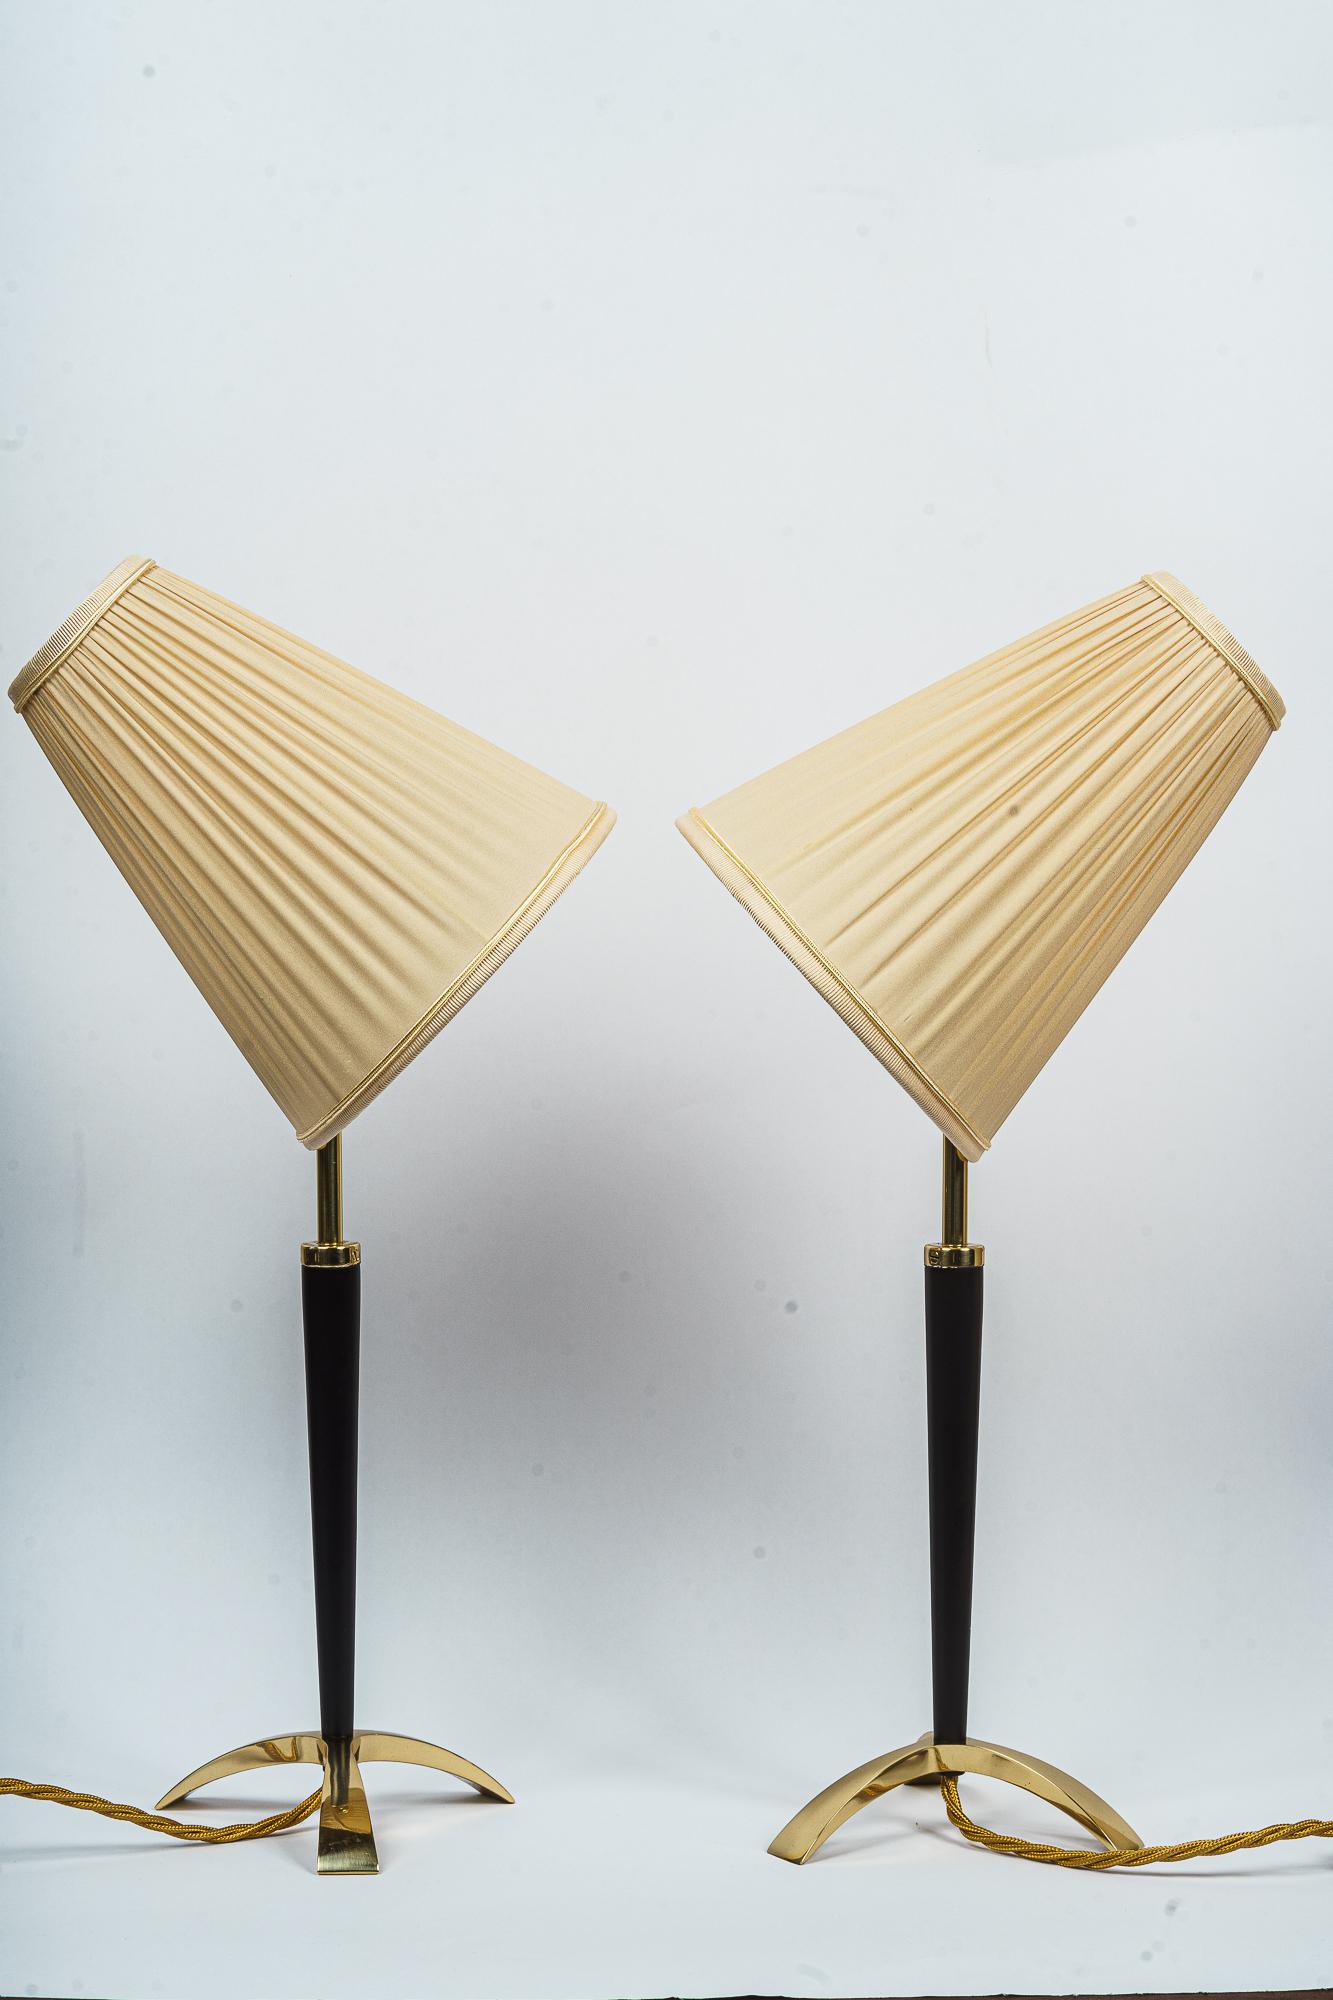 Two extendable table lamps by J.T. Kalmar, circa 1950s
Extendable in the hight from 50cm up to 54cm
Brass parts are polished and stove enamelled
The fabric is replaced ( new )
Pair price.